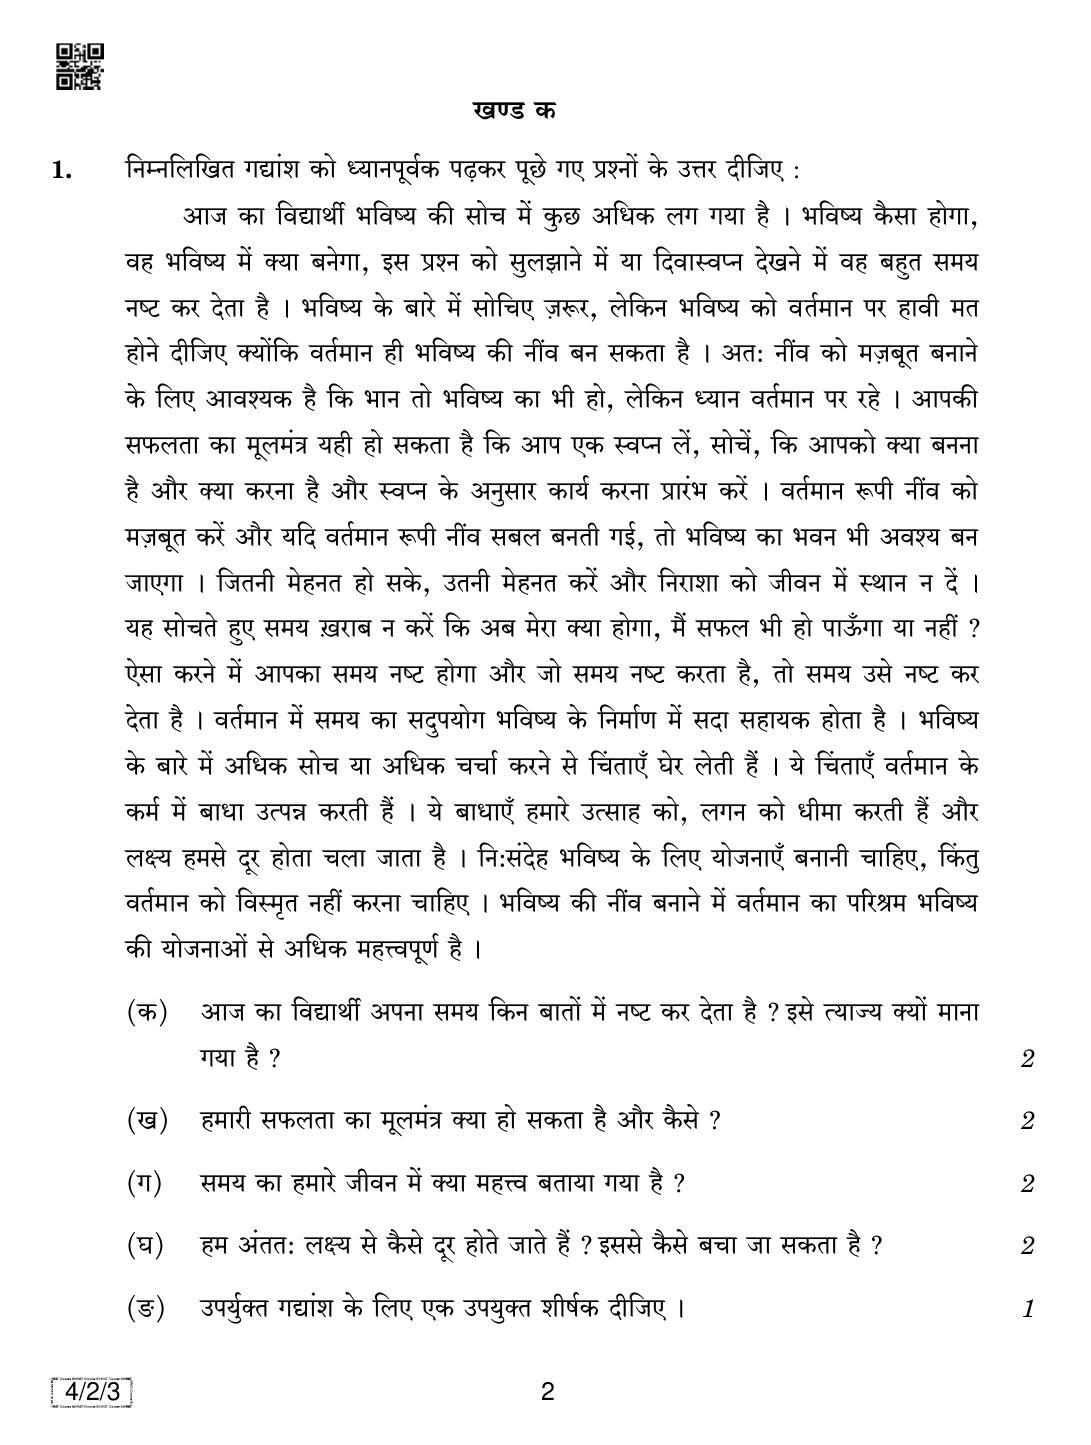 CBSE Class 10 4-2-3 HINDI COURSE- B 2019 Question Paper - Page 2